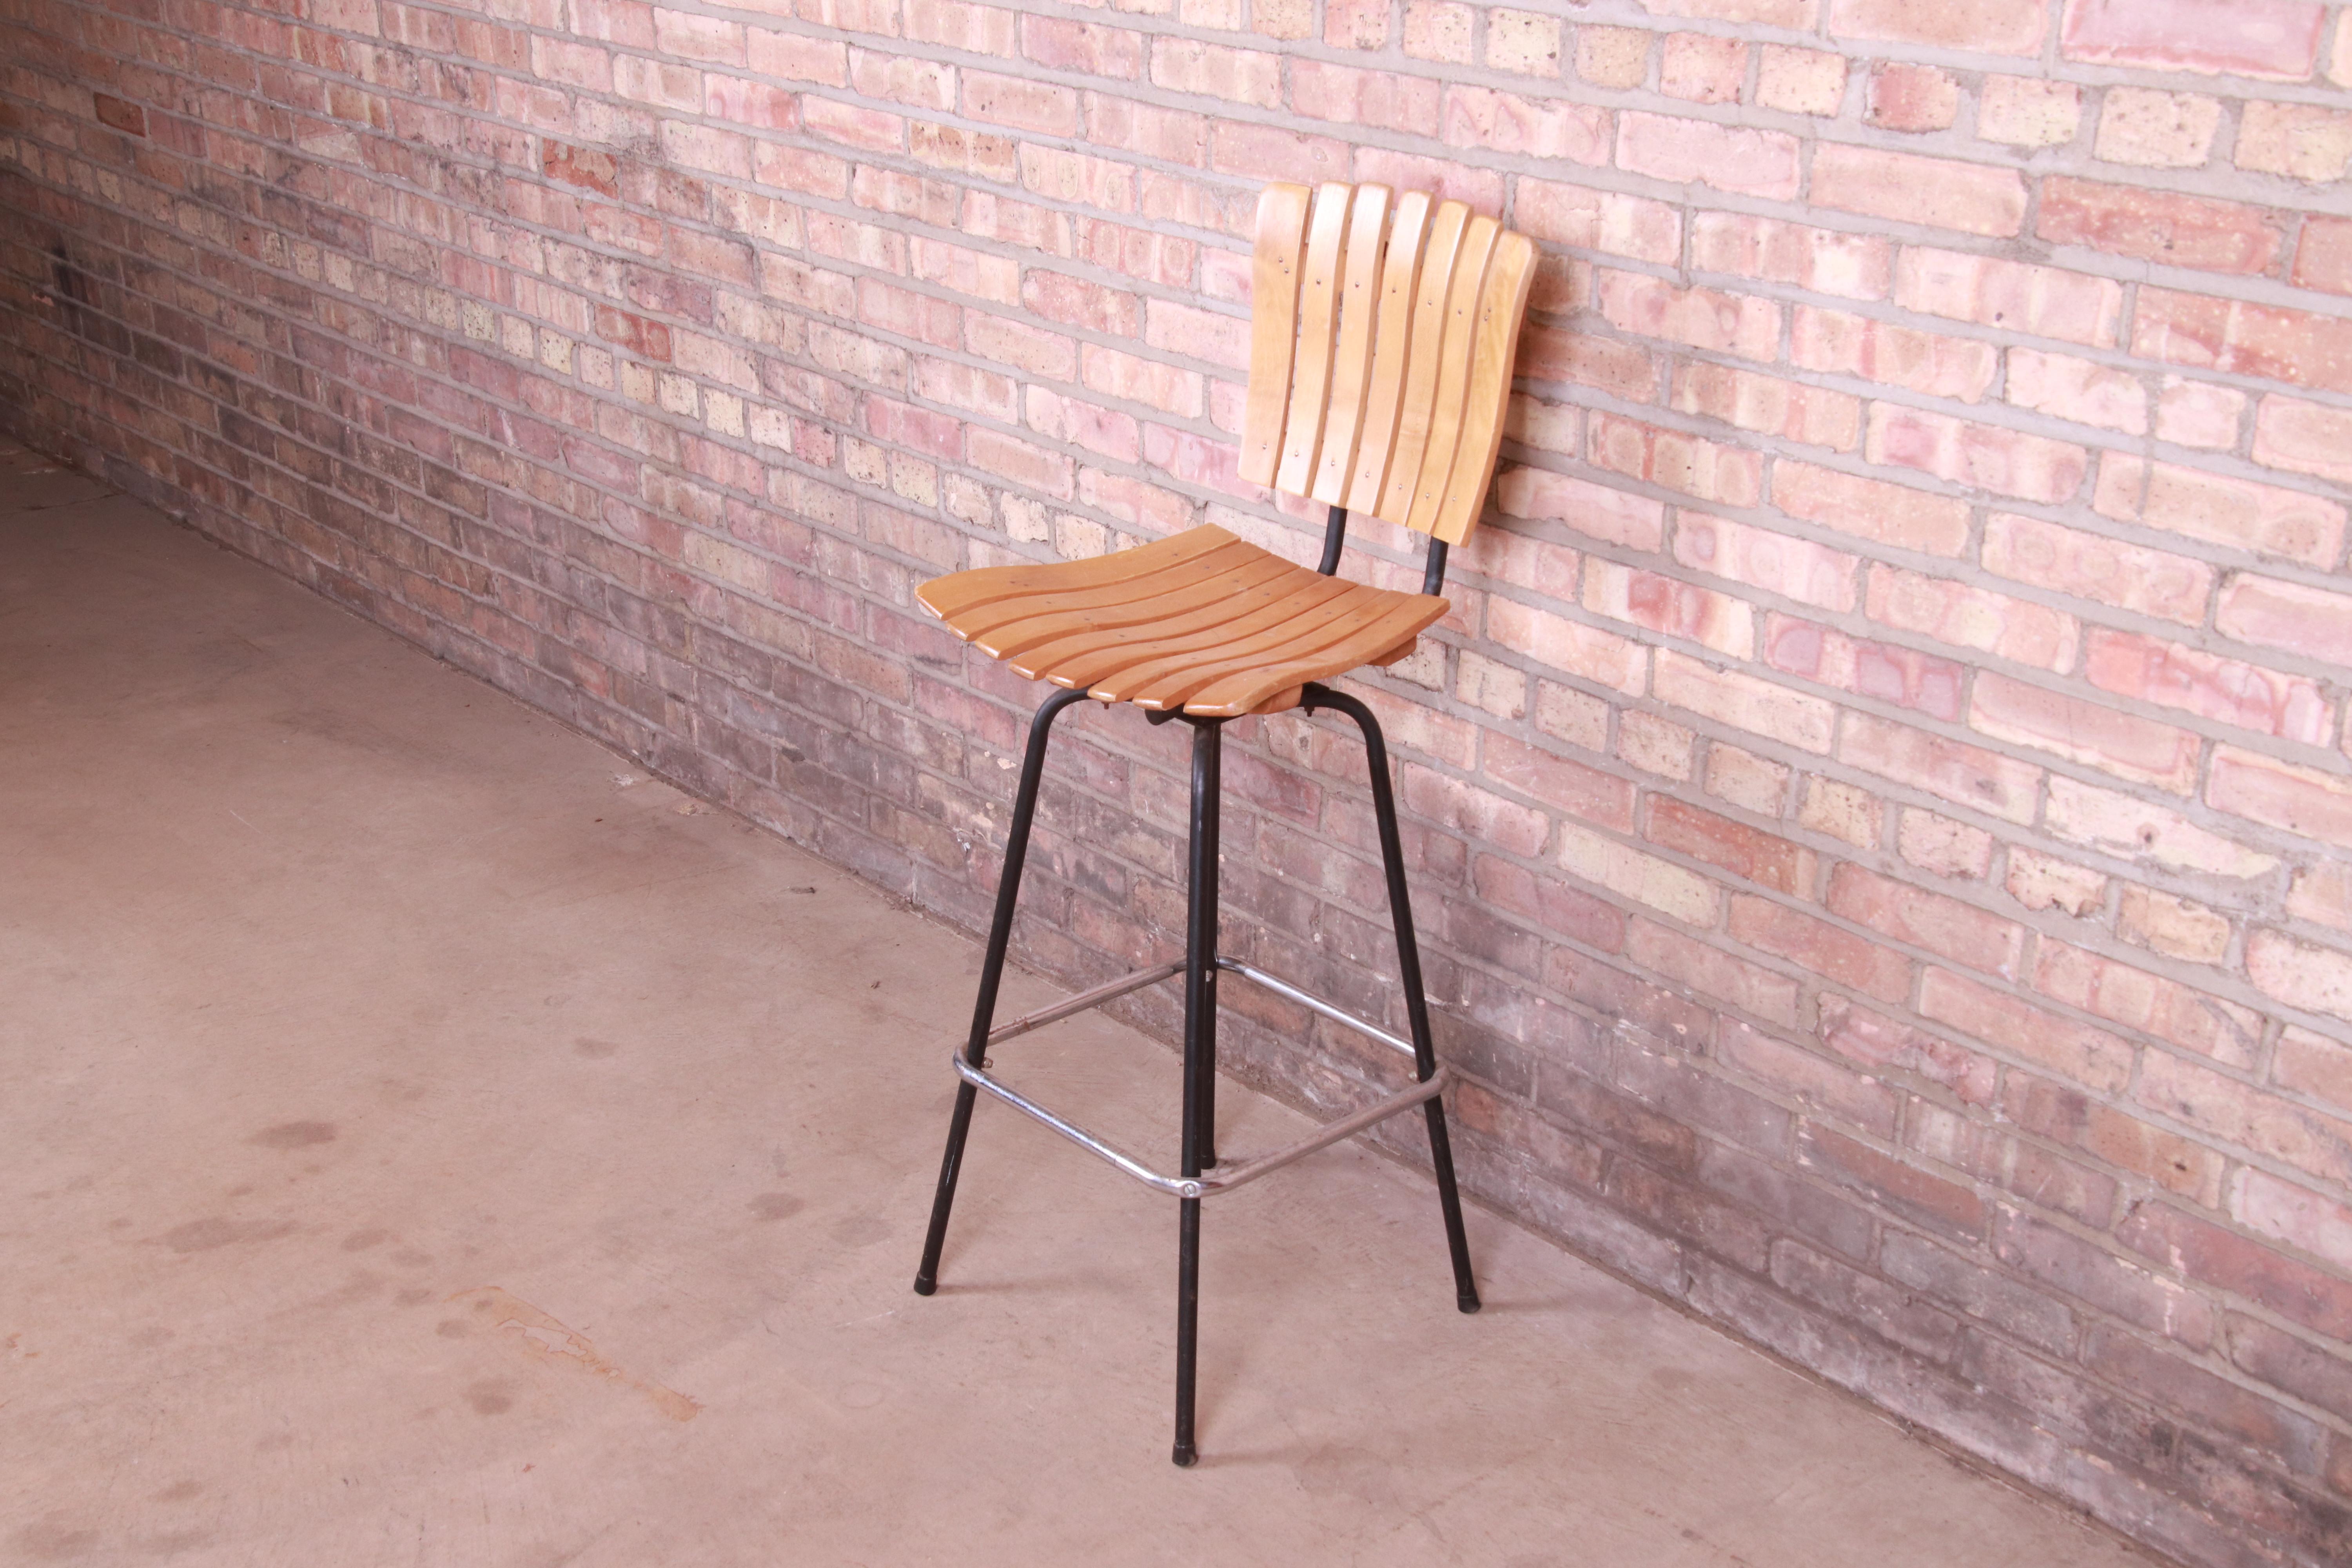 A gorgeous Mid-Century Modern swiveling bar stool

In the Manner of Arthur Umanoff

USA, Circa 1960s

Slatted wood seat and back, with steel frame.

Measures: 17